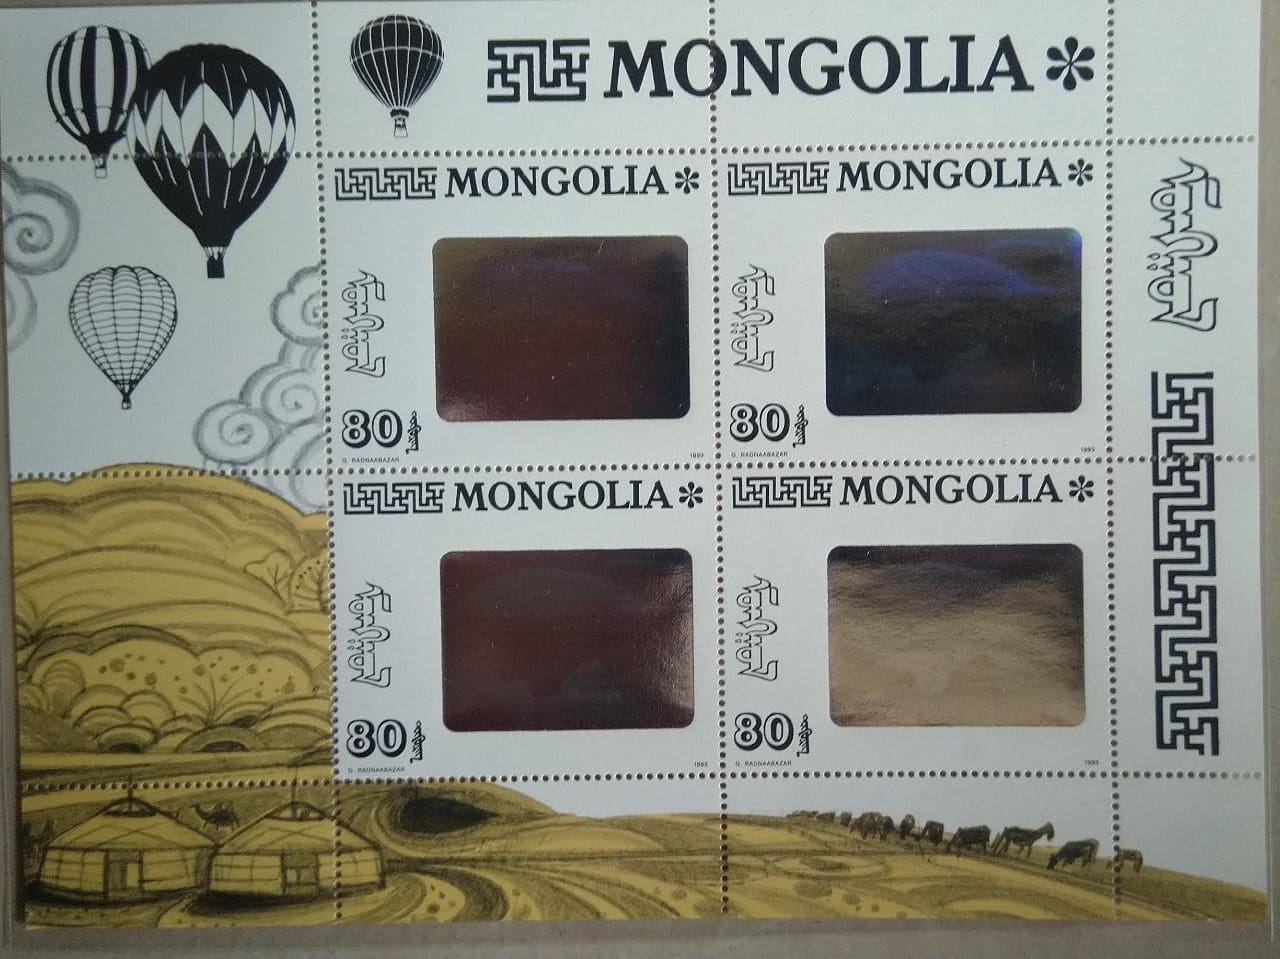 Mongolia-Holographic Unusual Stamp on Hot air balloon.